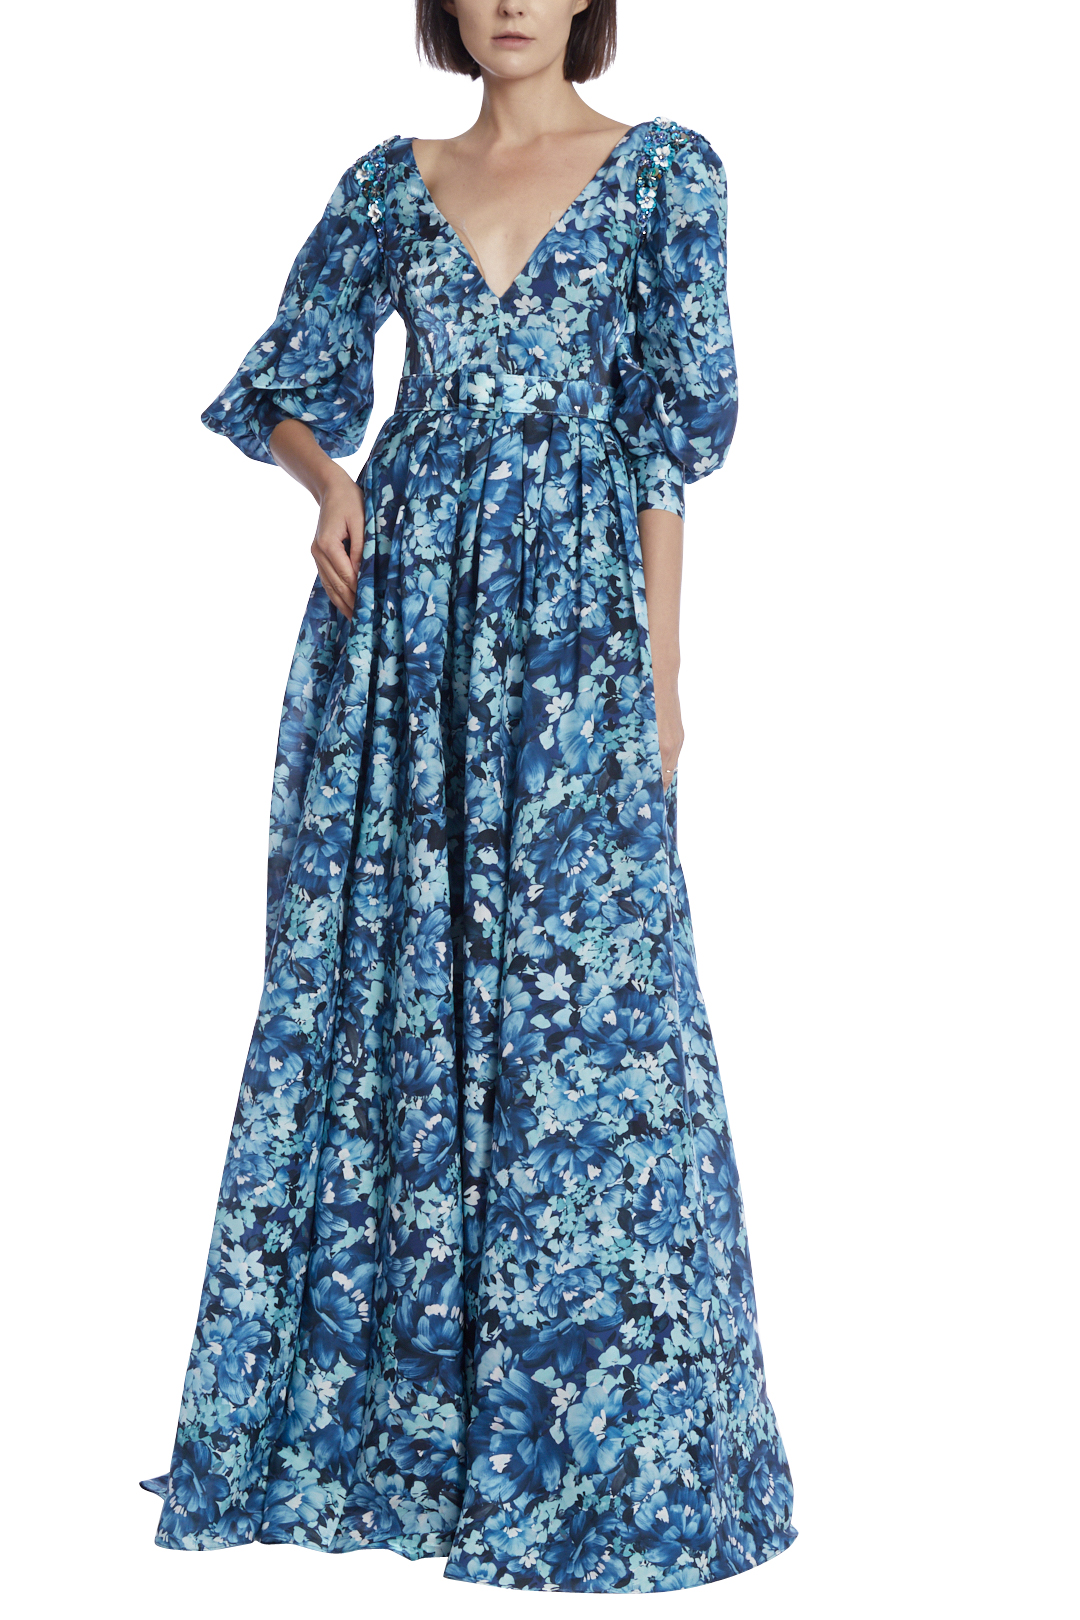 Buy Women's Long Sleeve Floral Maxi Dress V-Neck Casual Long Dresses Party  Maxi Dress (XX-Large, S02) at Amazon.in